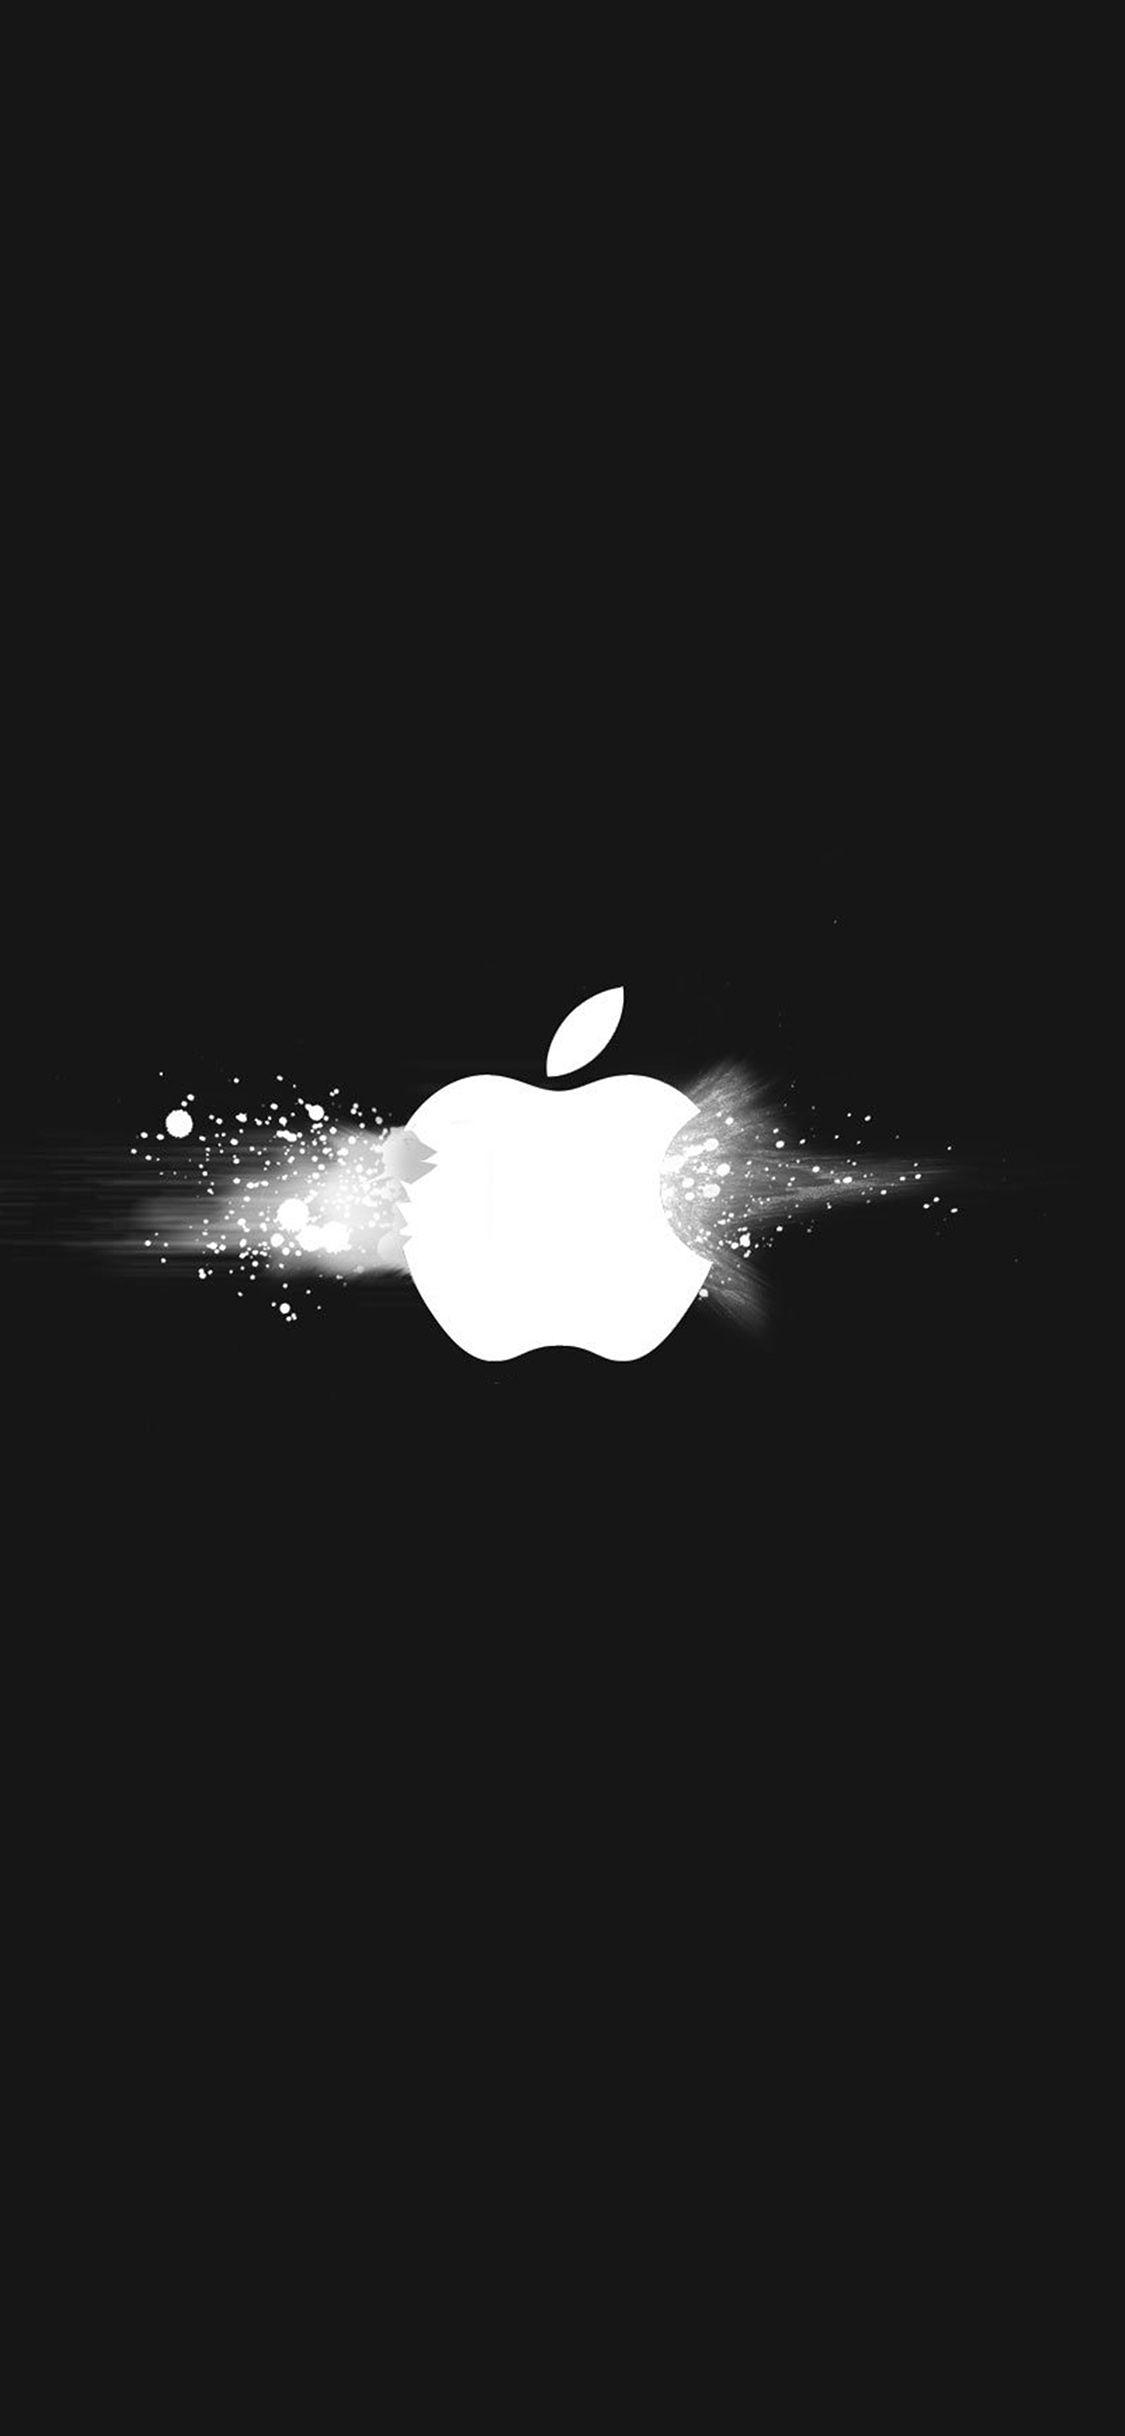 Black Apple Iphone Wallpapers Top Free Black Apple Iphone Backgrounds Wallpaperaccess